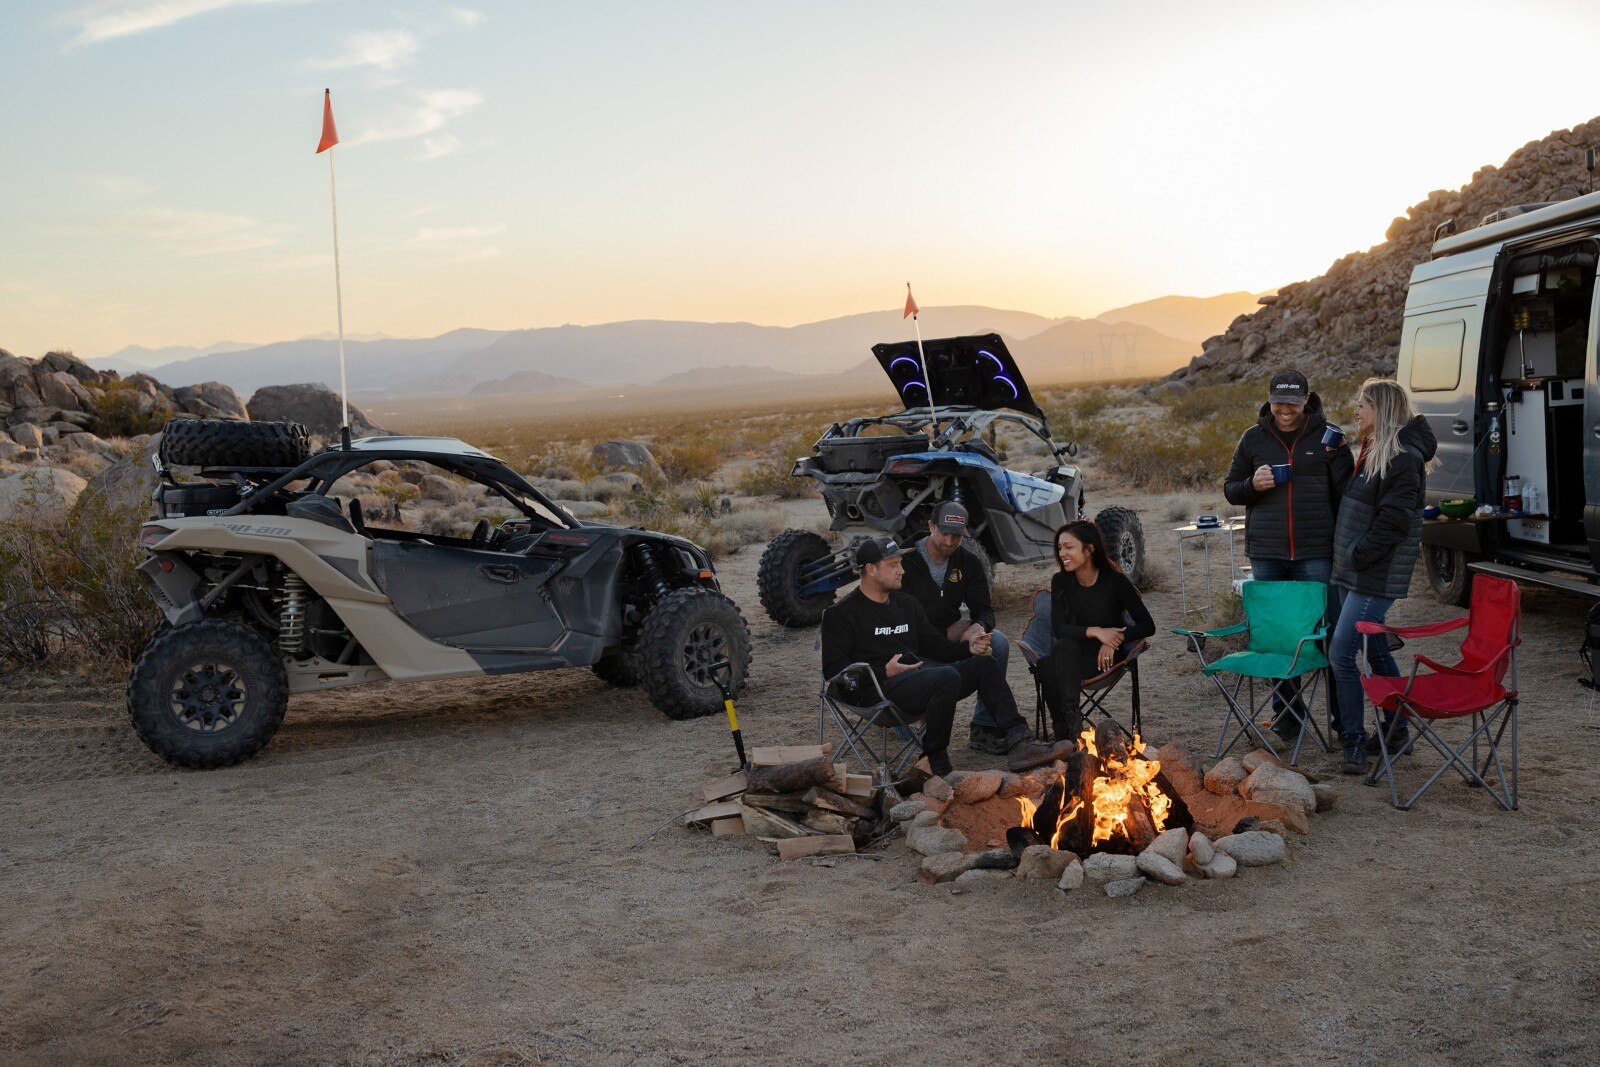 Can-Am Riders enjoying a campfire after a day of riding, with their Maverick X3s in the background